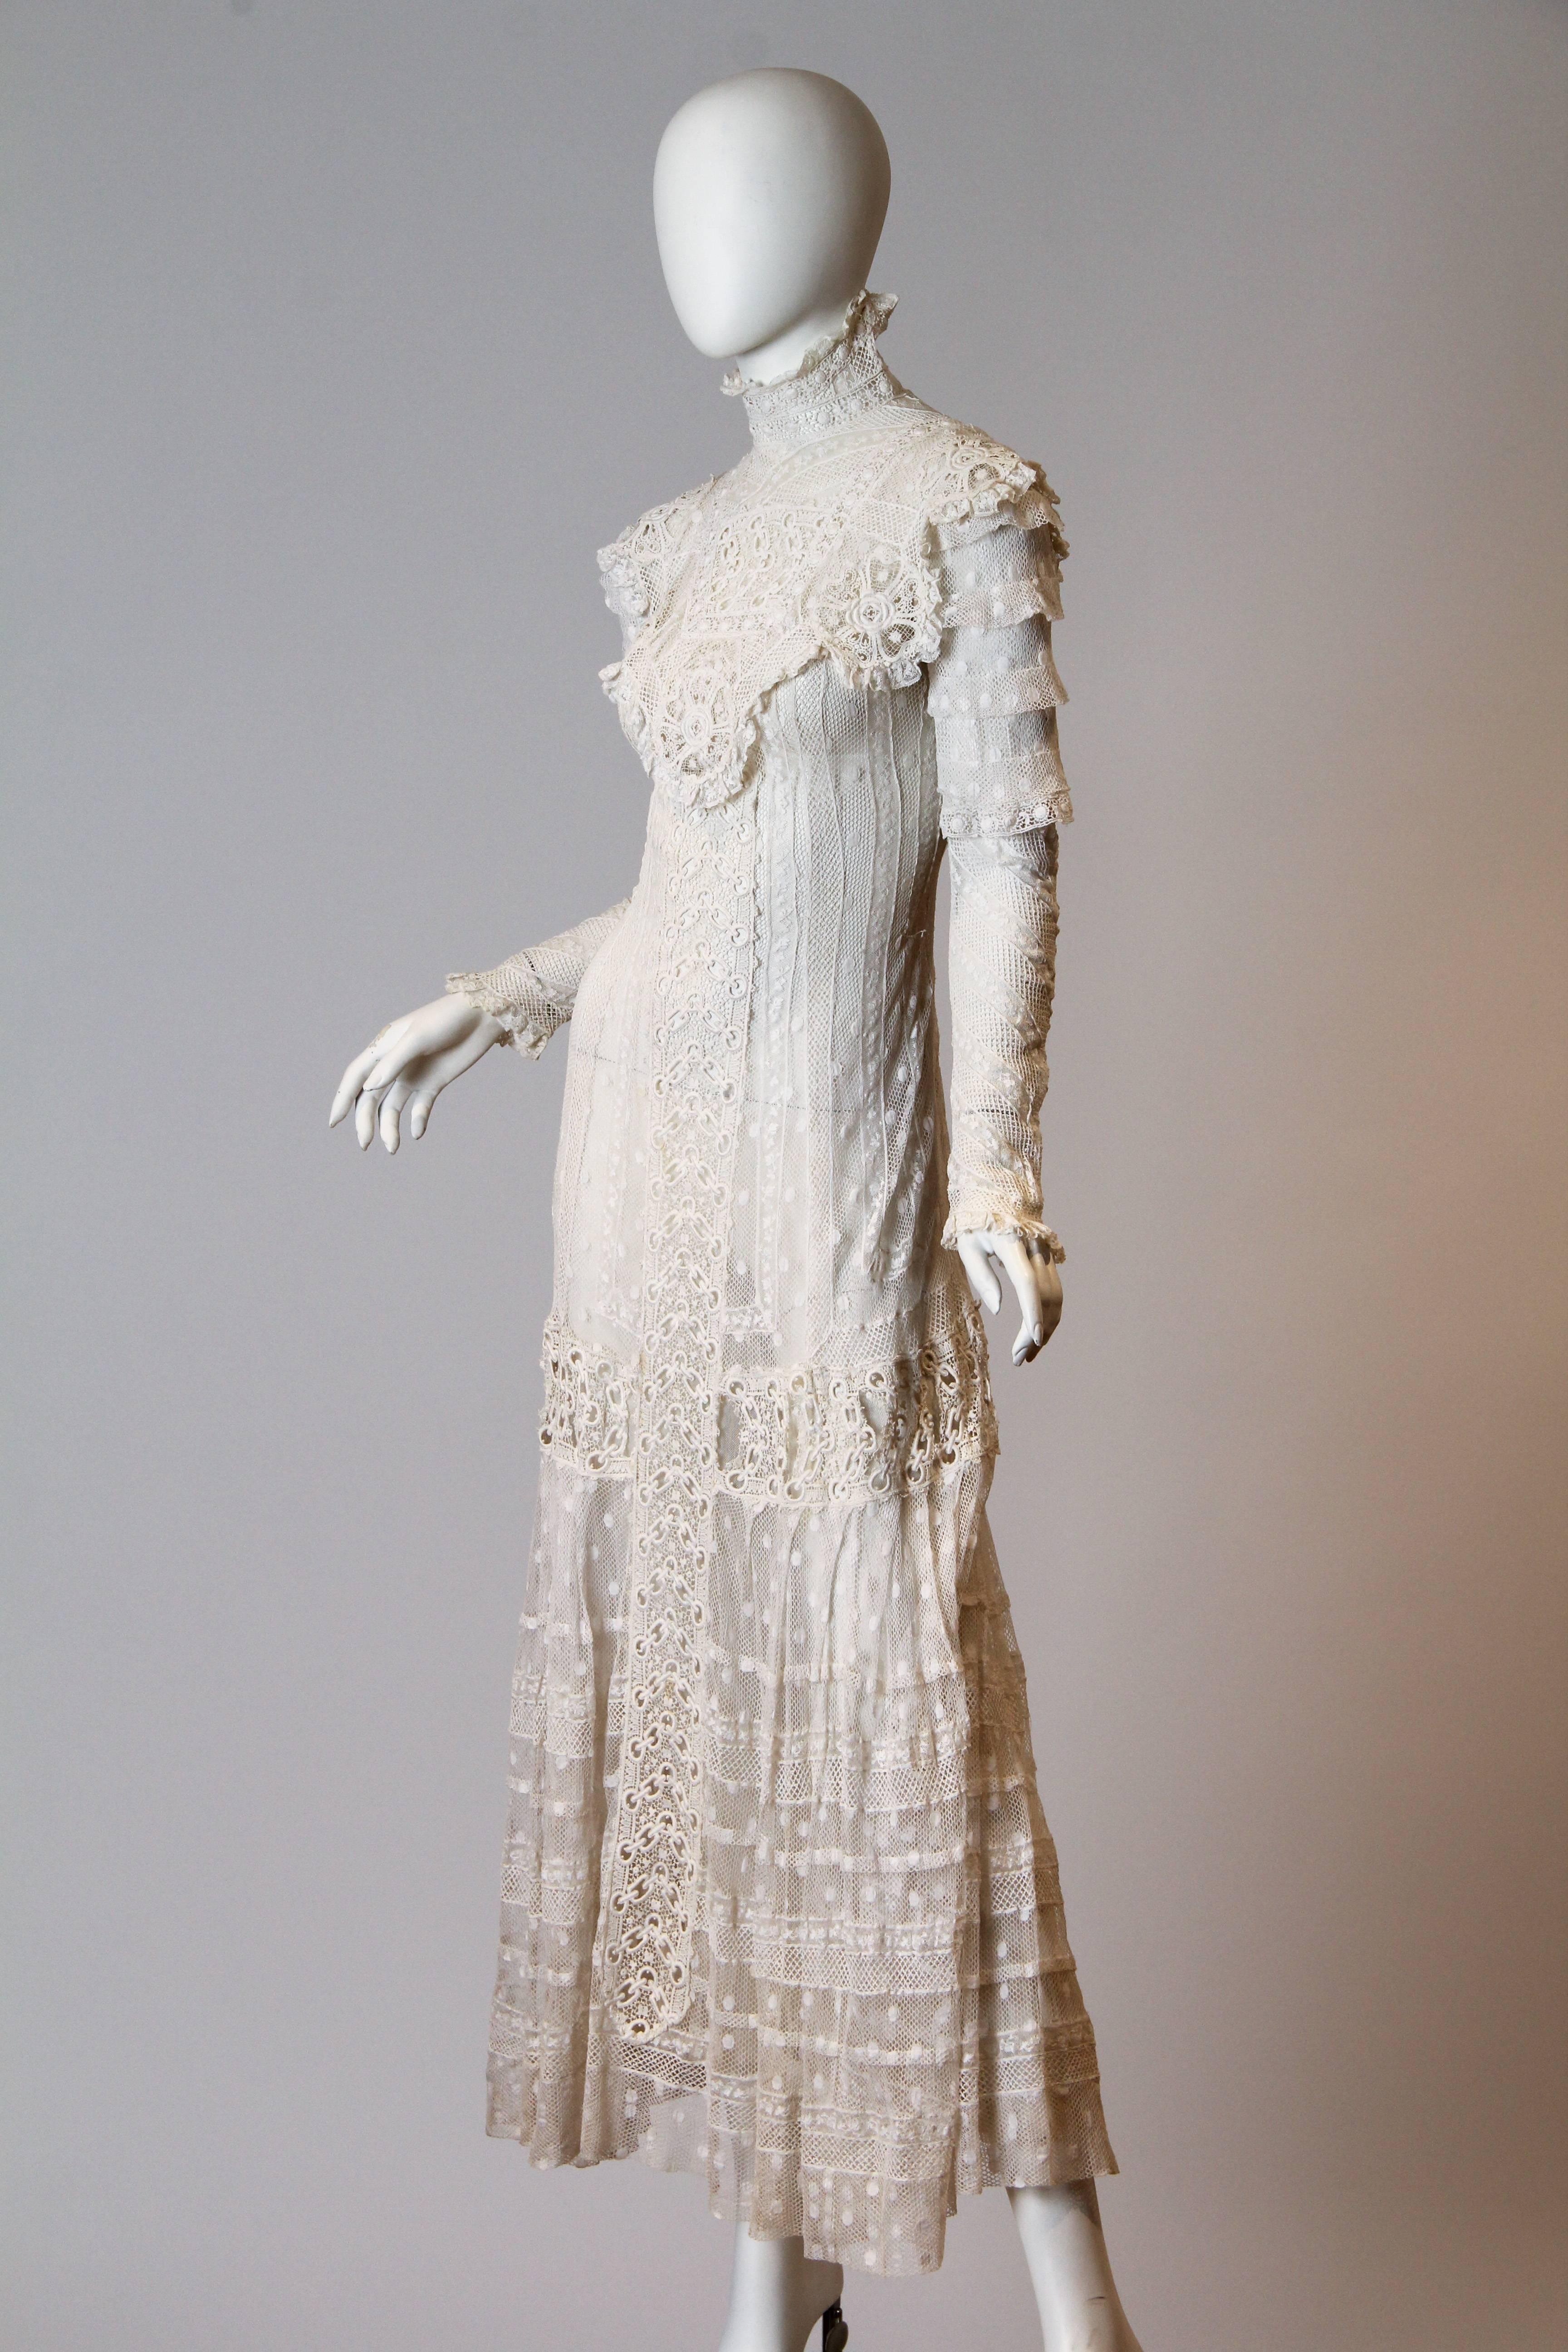 This is a breathtaking mesh and lace tea gown from the early 20th century, most likely made between 1908 and 1912. During this part of the Edwardian era, the extreme S-bend corset of the turn of the century was slowly morphing in shape and moving